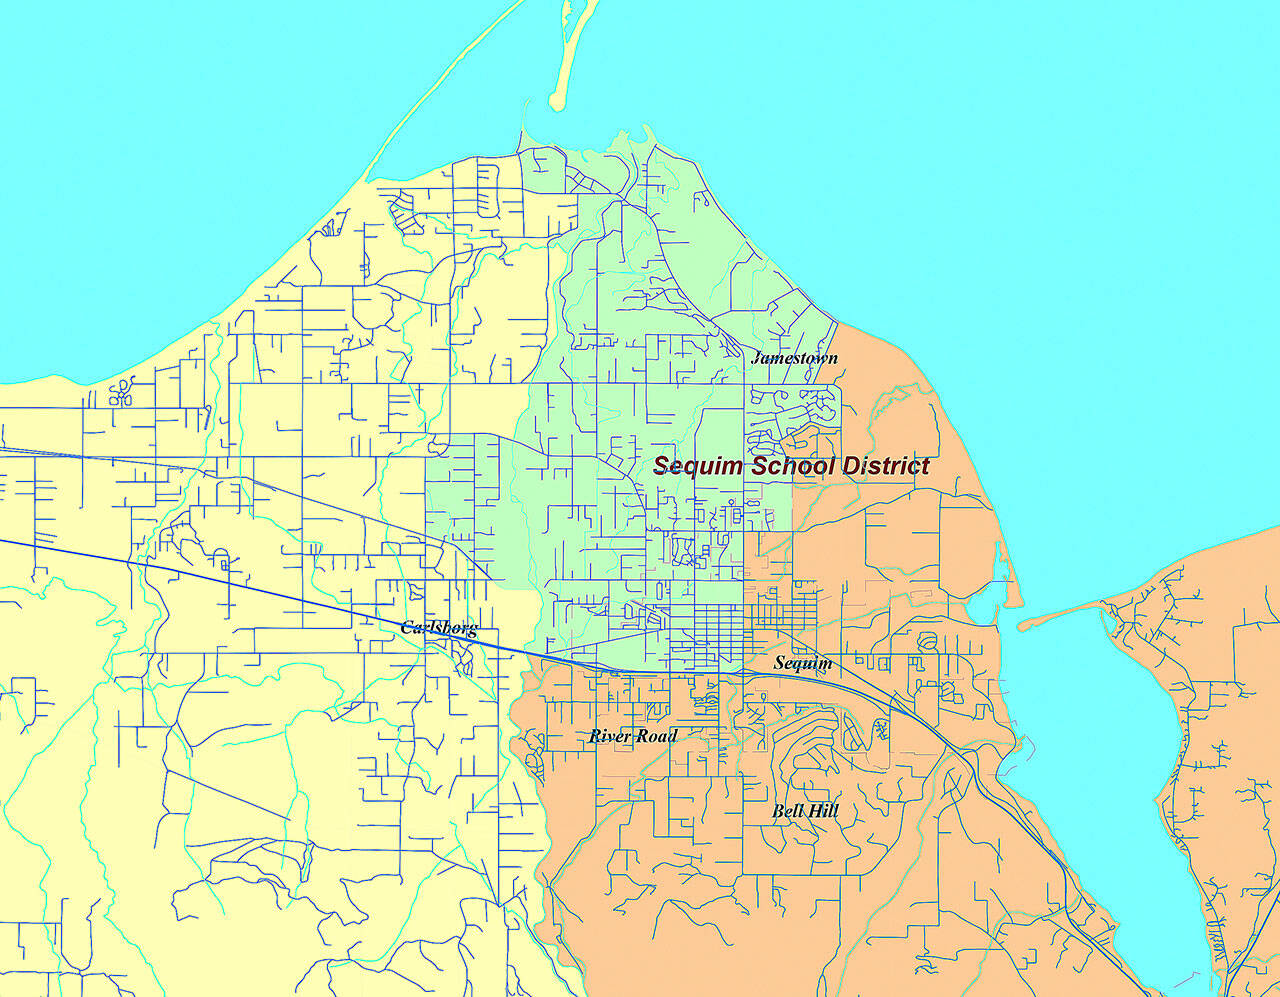 A map of current Sequim School District director boundaries shows District 1 to the west (left) in yellow, District 2 to the north (green) and District 3 to the south and east (orange). Map courtesy of Sequim School District